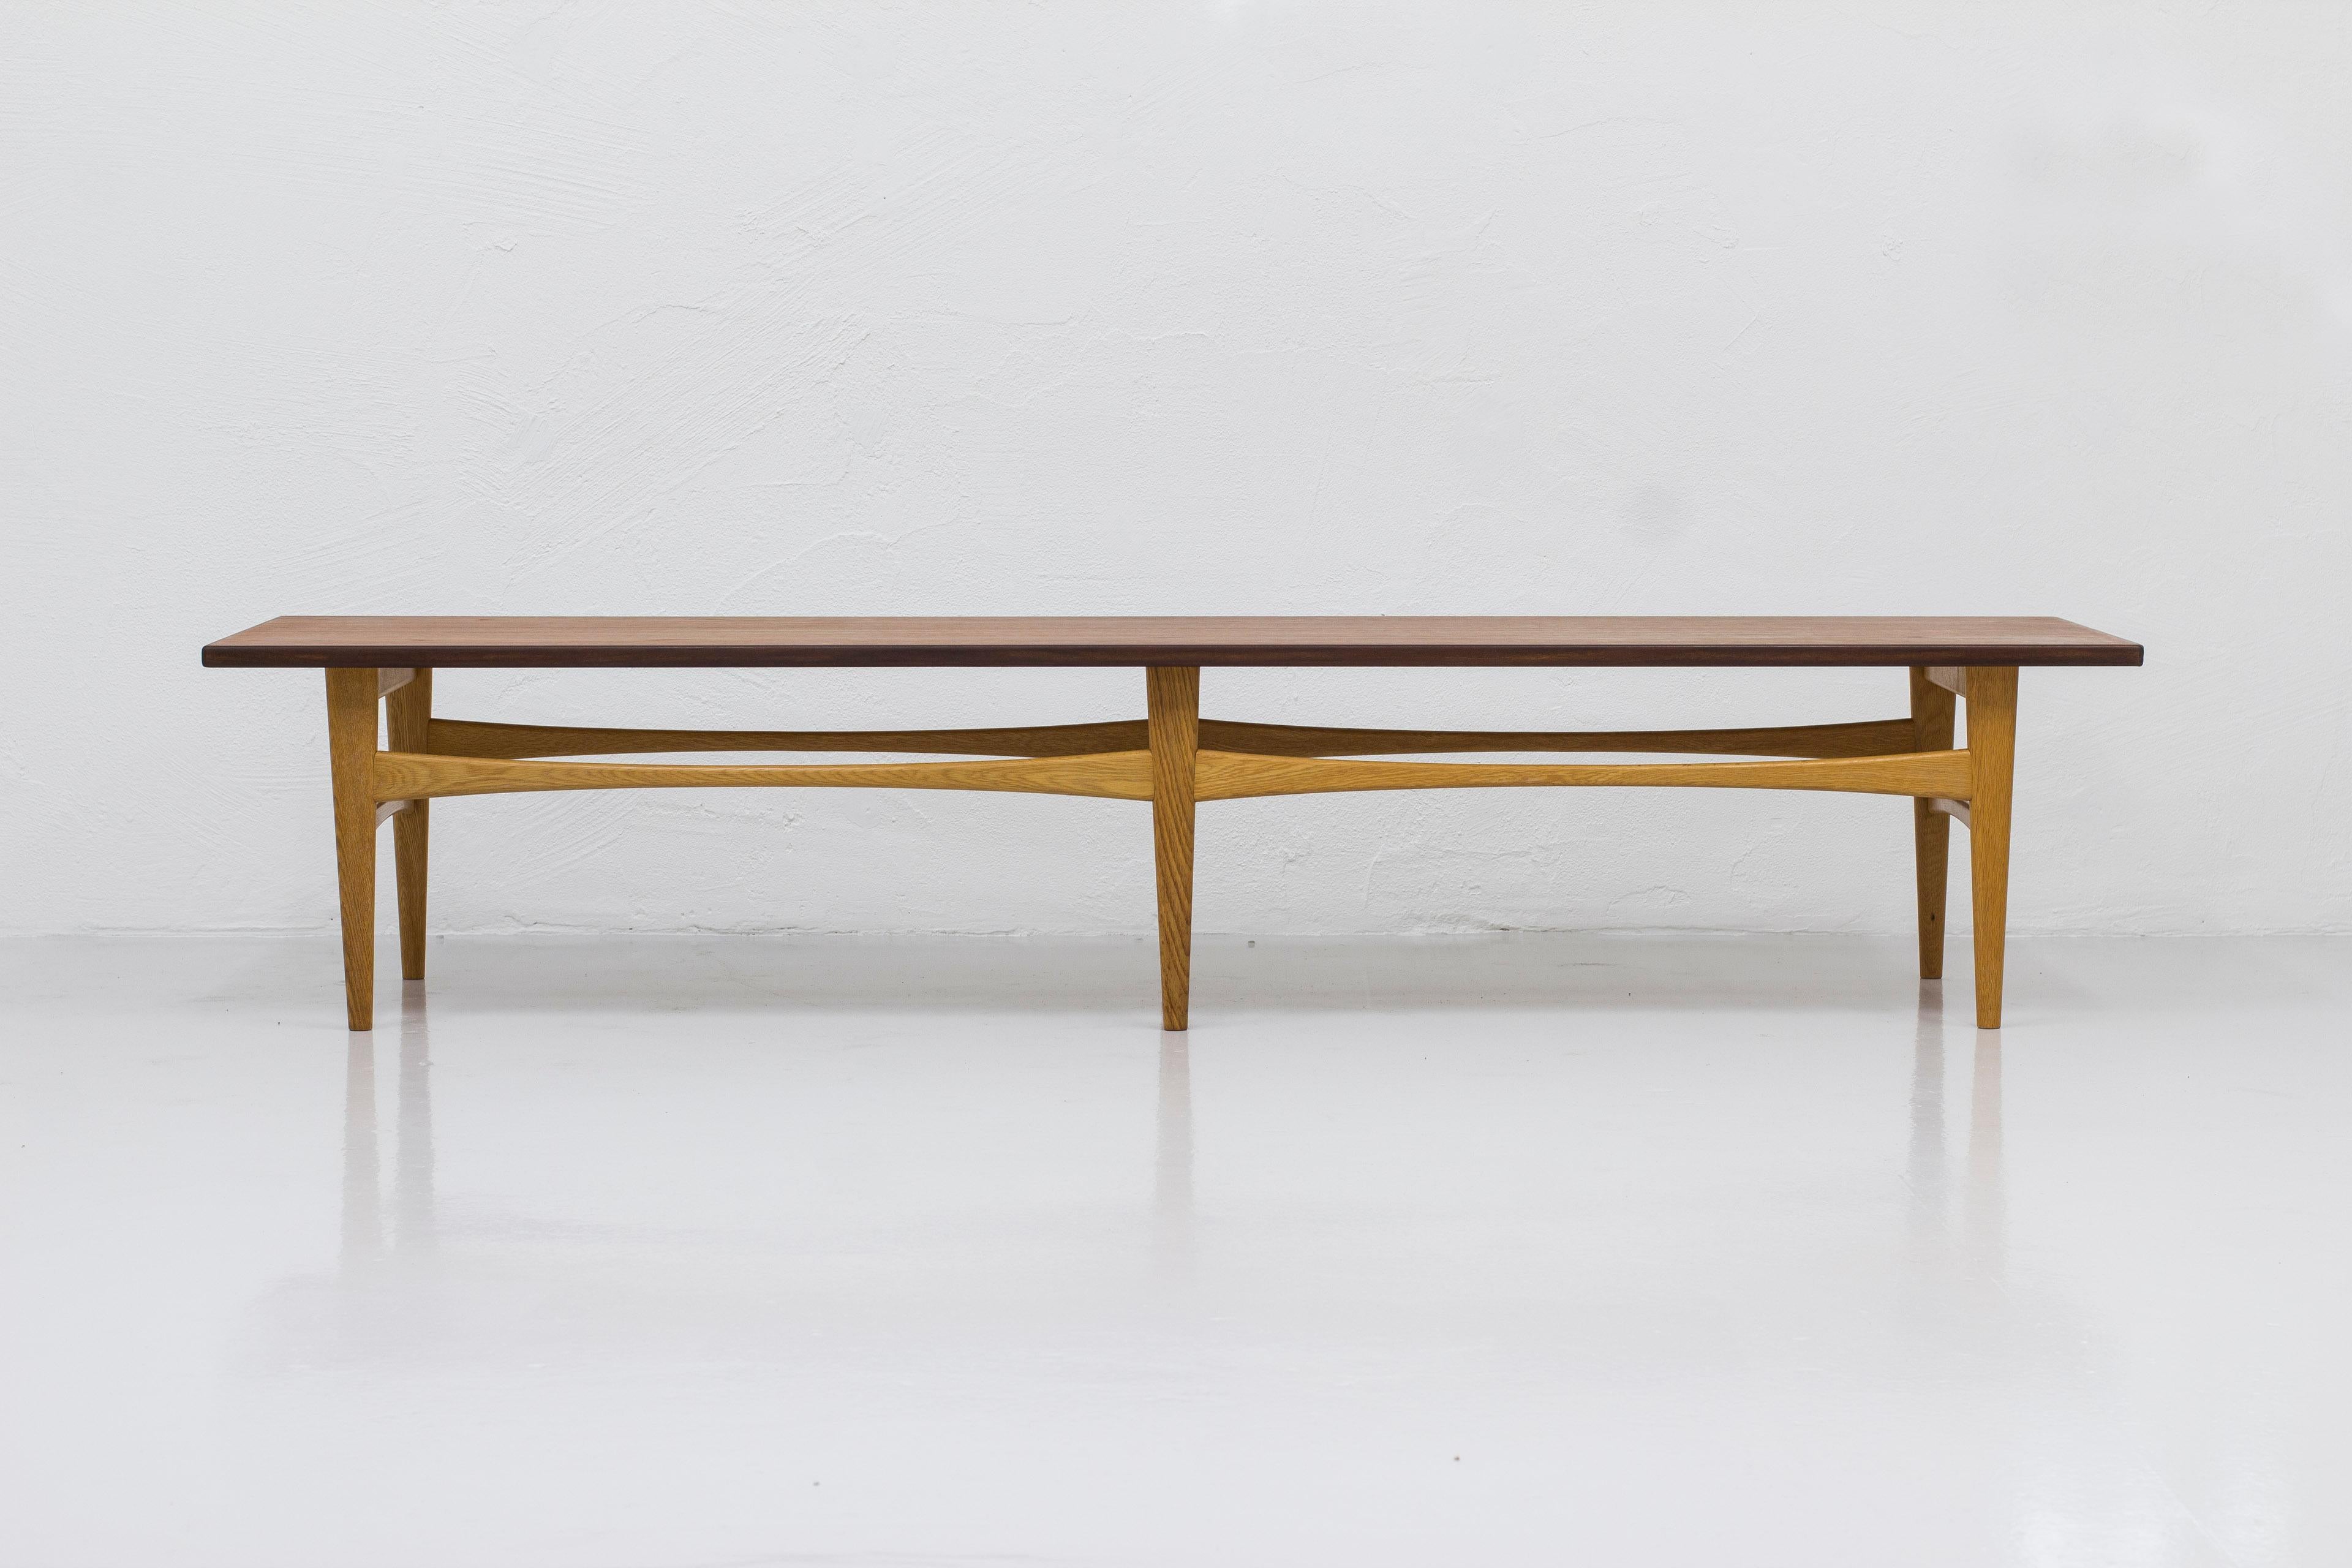 Scandinavian Modern Teak and Oak Bench or Table by Eric Johansson for Abra, Sweden, 1950s For Sale